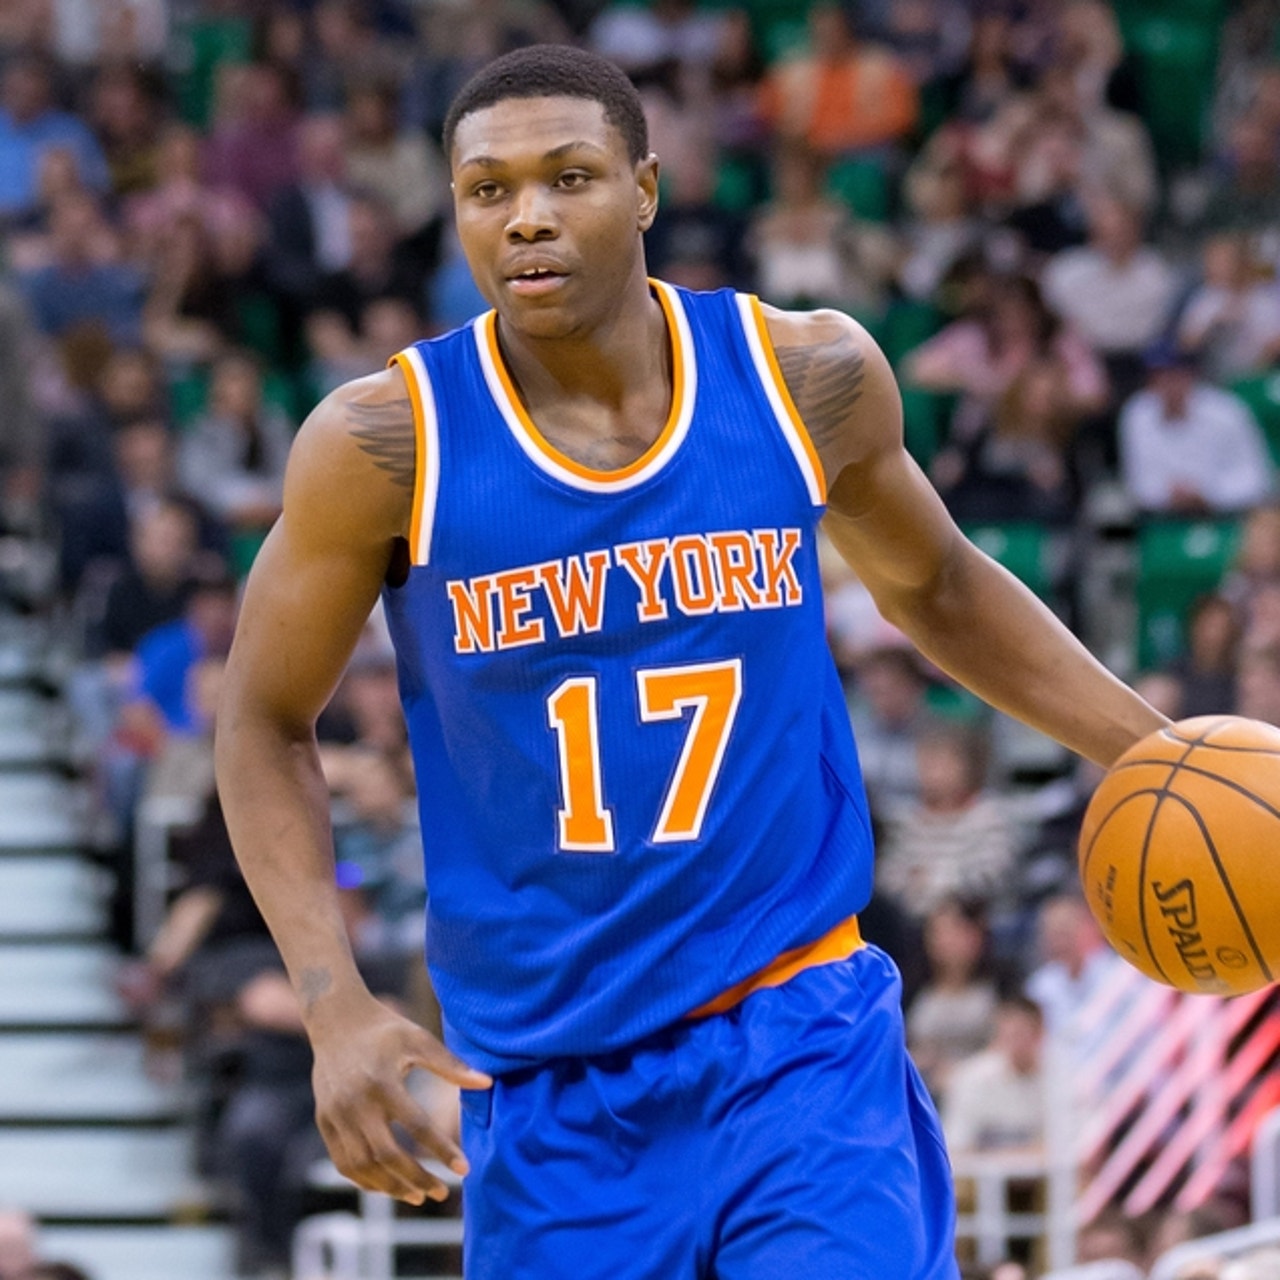 Westchester Knicks: Top 3 Moments Franchise History